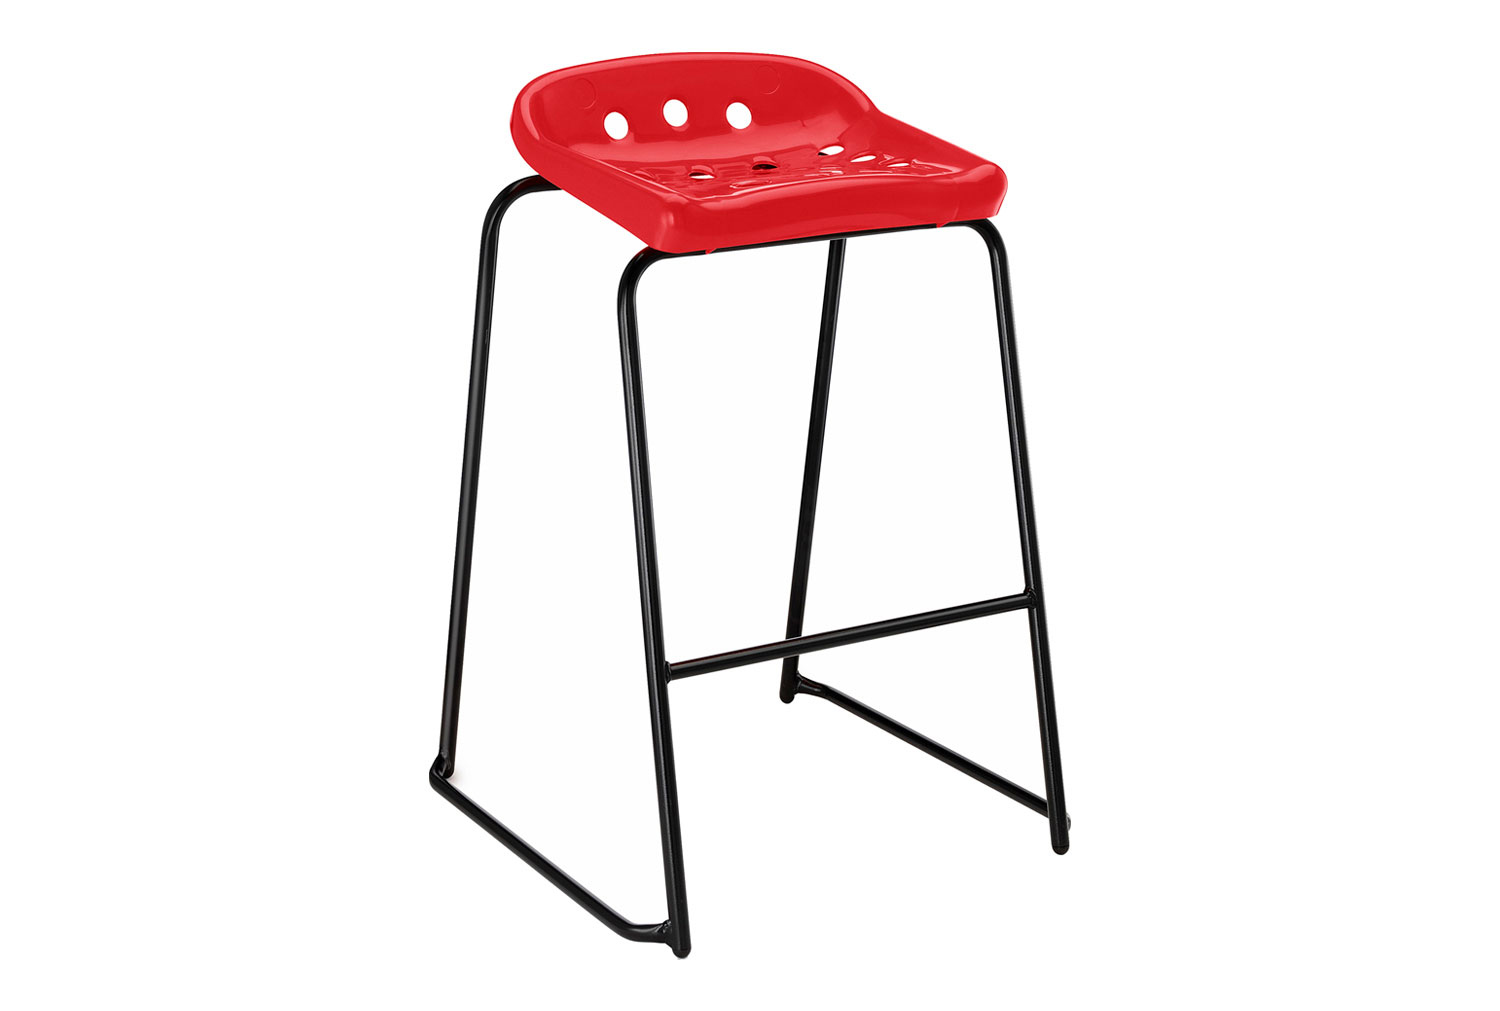 Qty 8 - Hille Pepperpot Classroom Stool, 61h (cm), Grey Frame, Red